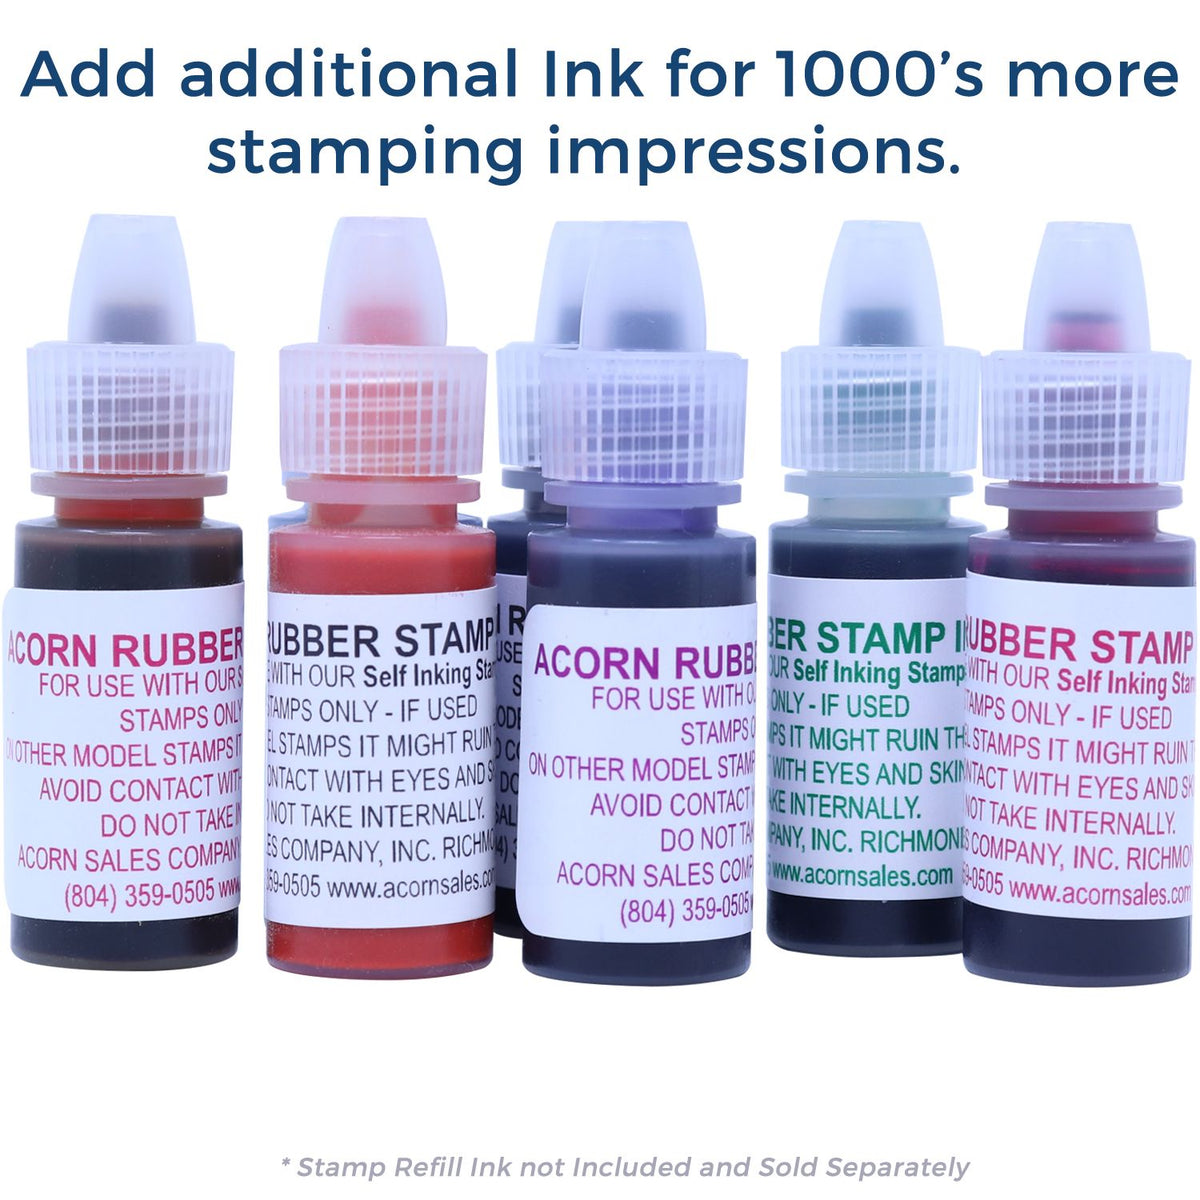 Refill Ink for Self-Inking Round Happy Face Stamp Available